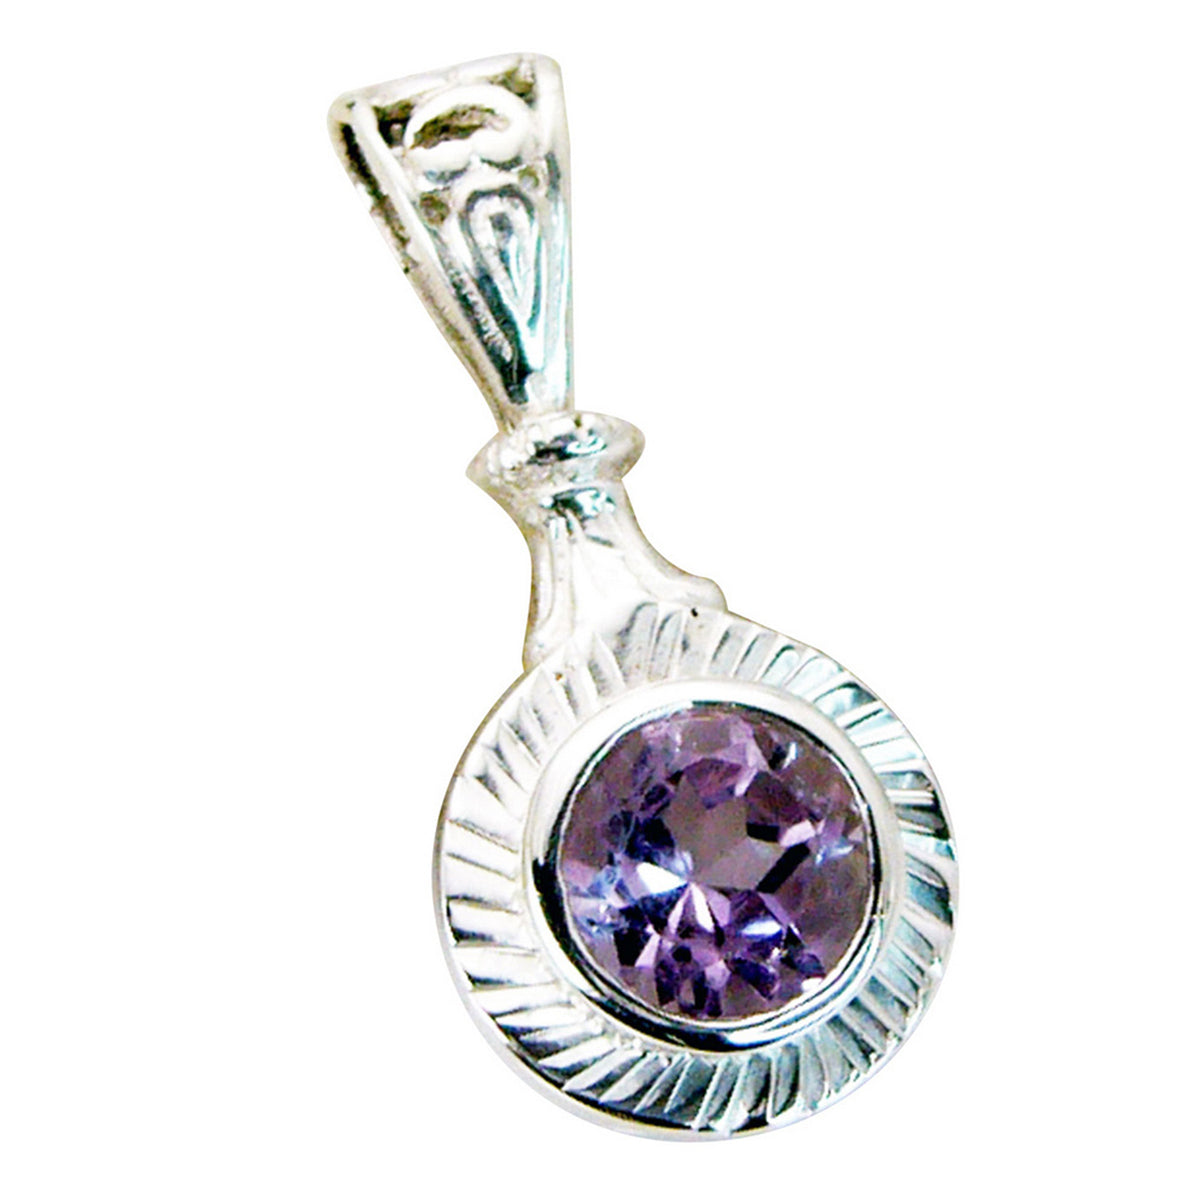 Riyo Smashing Gems Round Faceted Purple Amethyst Silver Pendant Gift For Wife